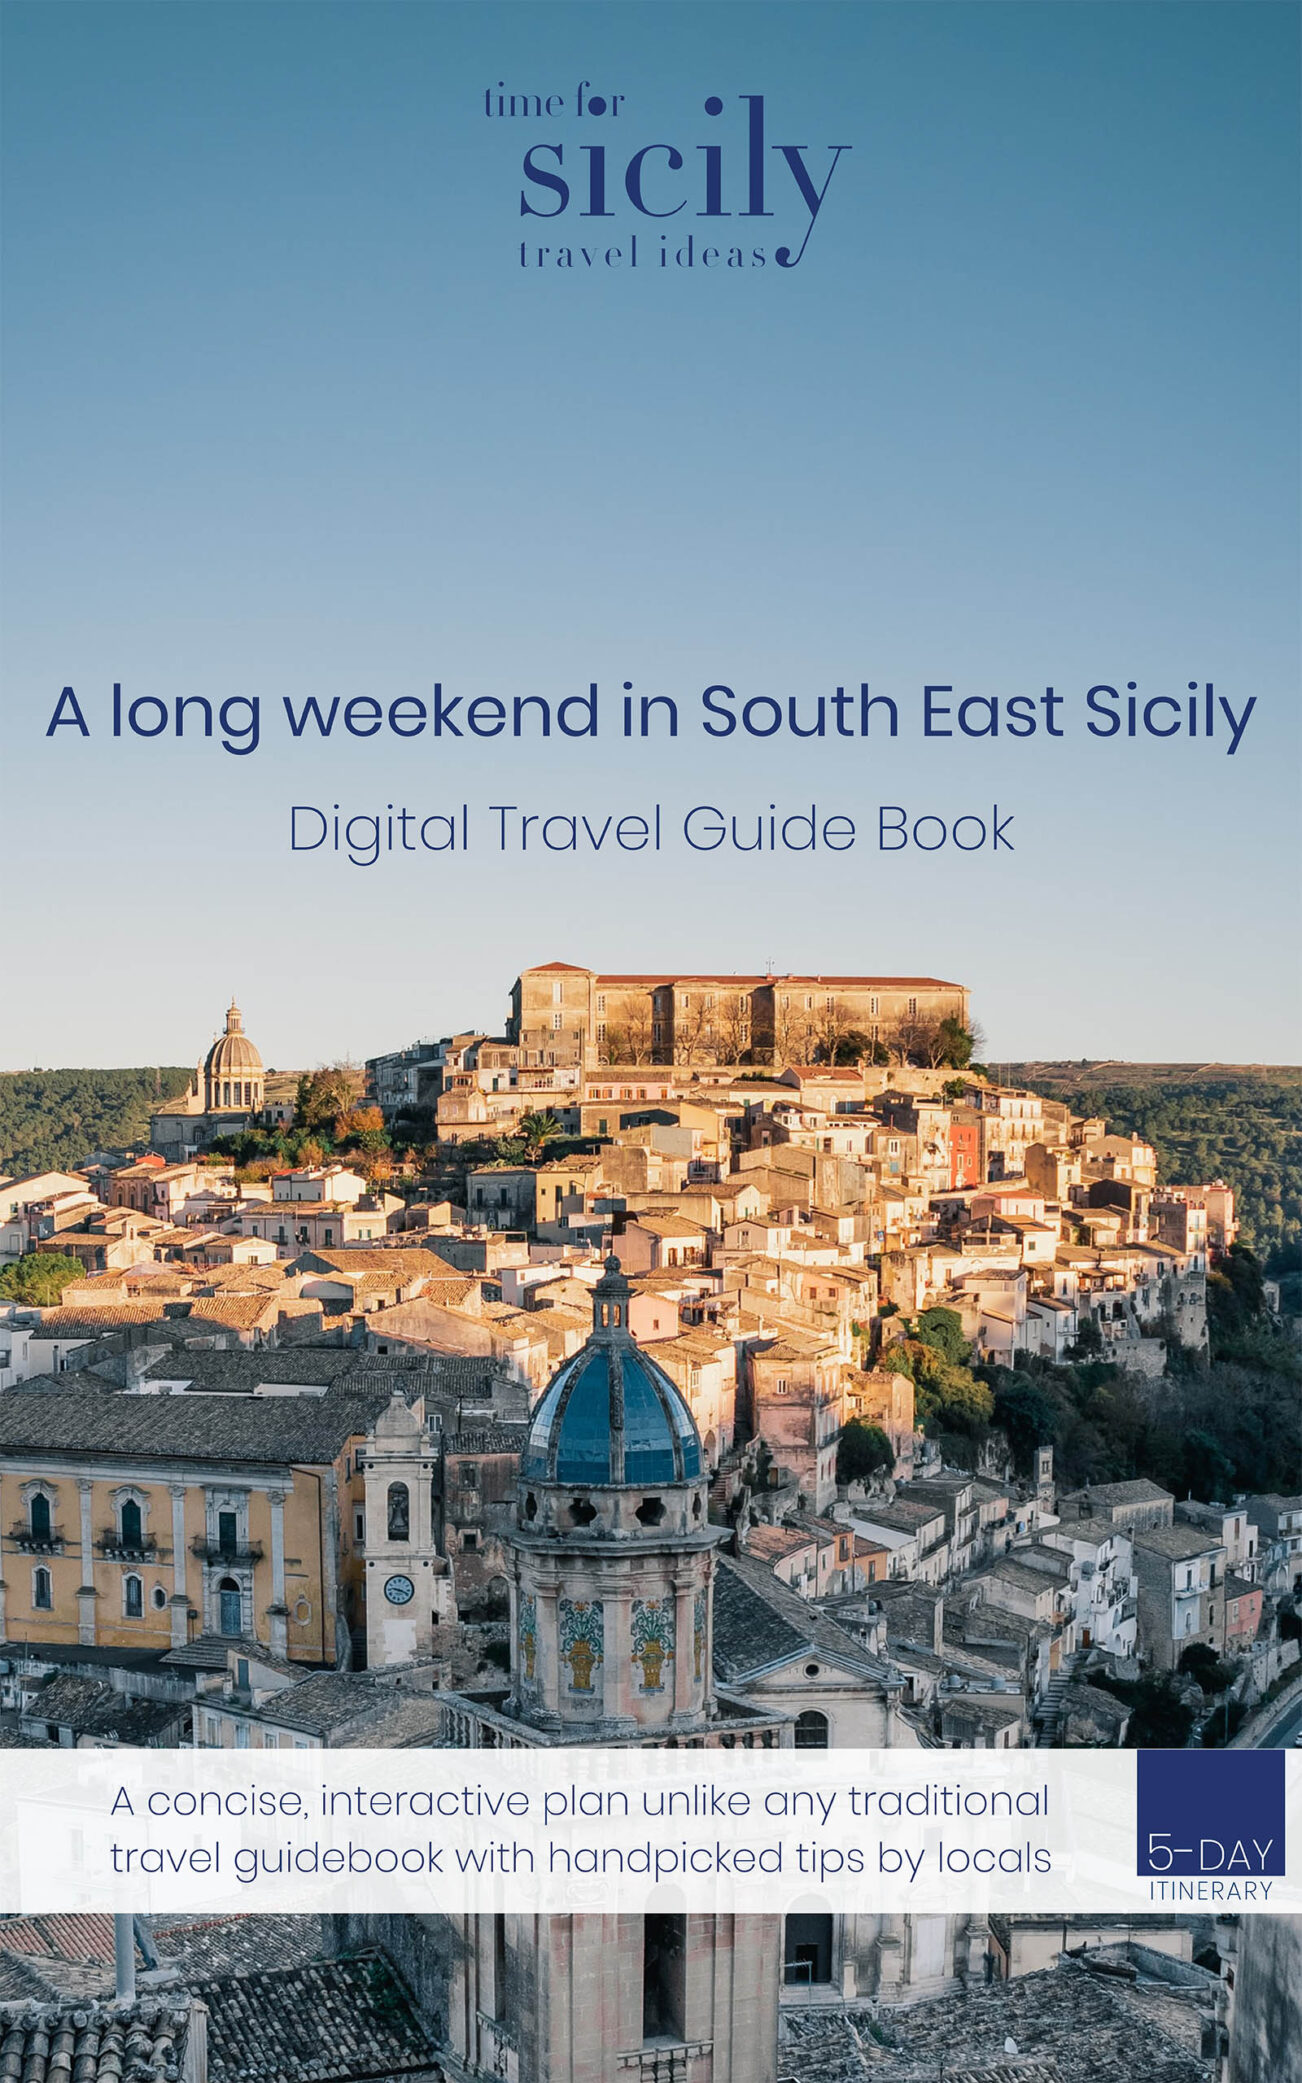 A LONG WEEKEND IN SOUTH EAST SICILY Digital Travel Guide book